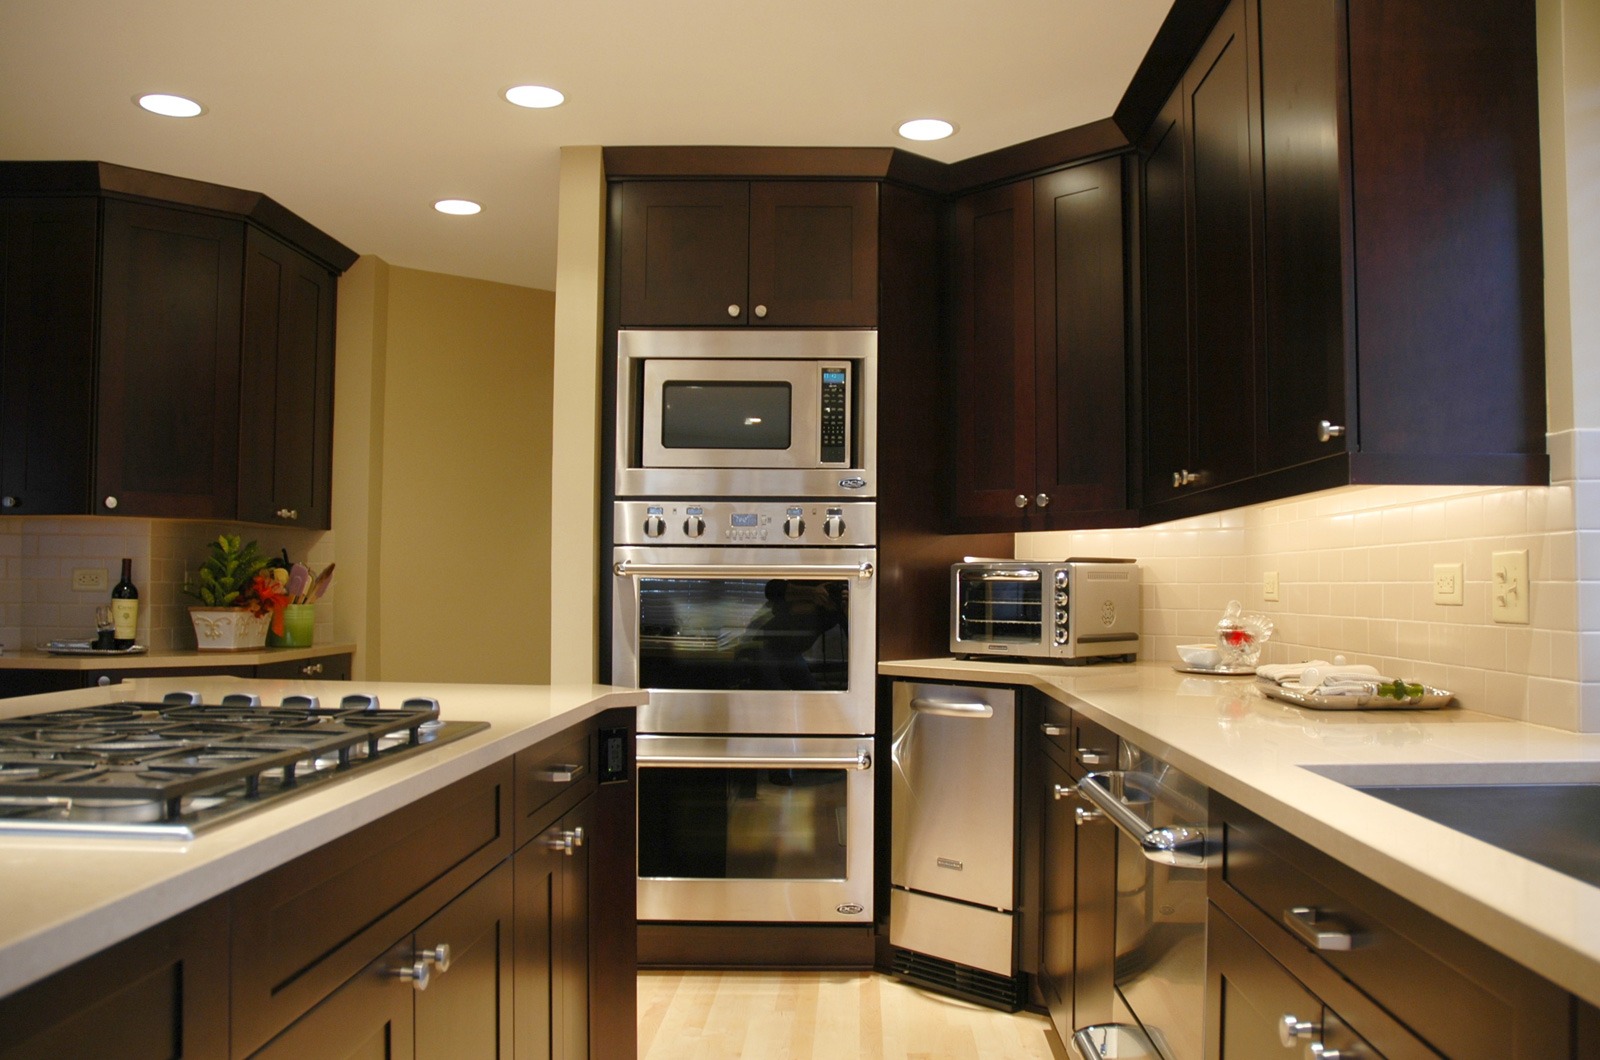 Kitchen remodeling in Naperville, IL. Microwave and oven placed together to maximize storage.